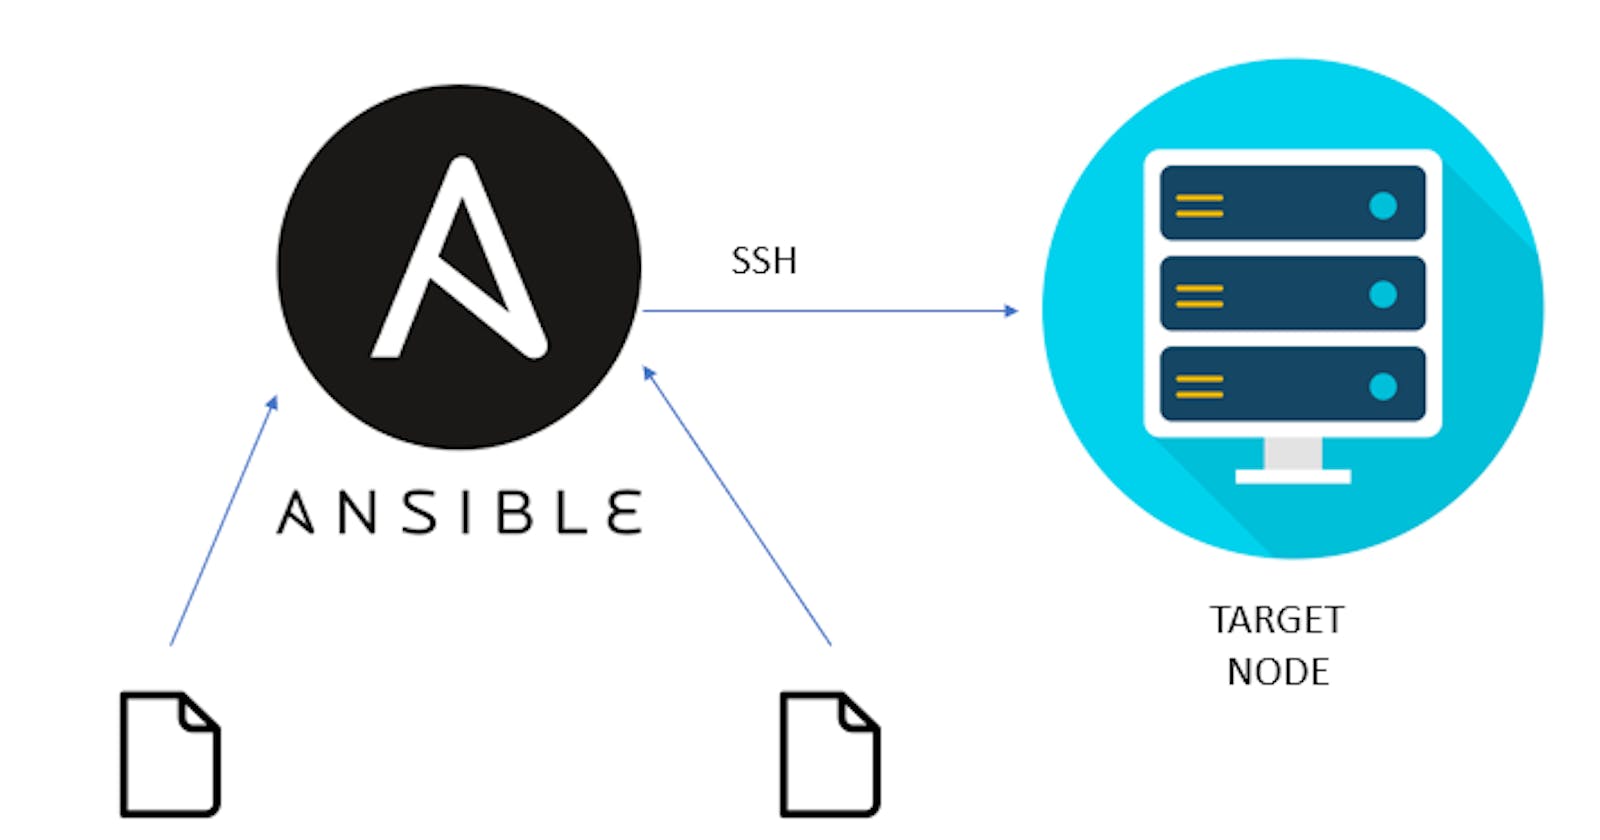 Add SSH Key to AWS EC2 Instance using Ansible Playbook